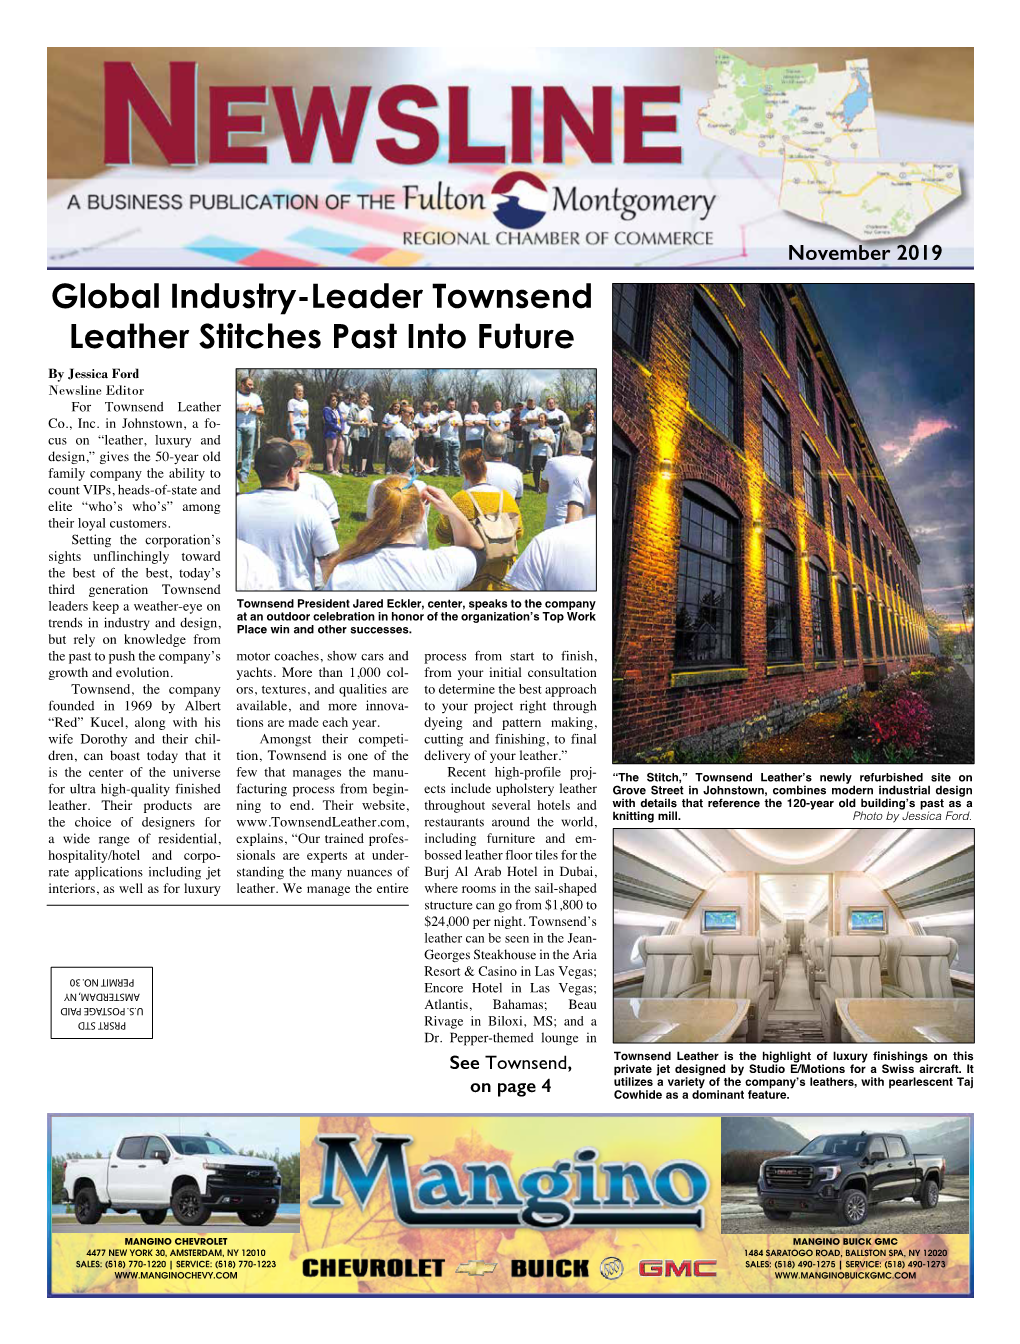 November 2019 Global Industry-Leader Townsend Leather Stitches Past Into Future by Jessica Ford Newsline Editor for Townsend Leather Co., Inc